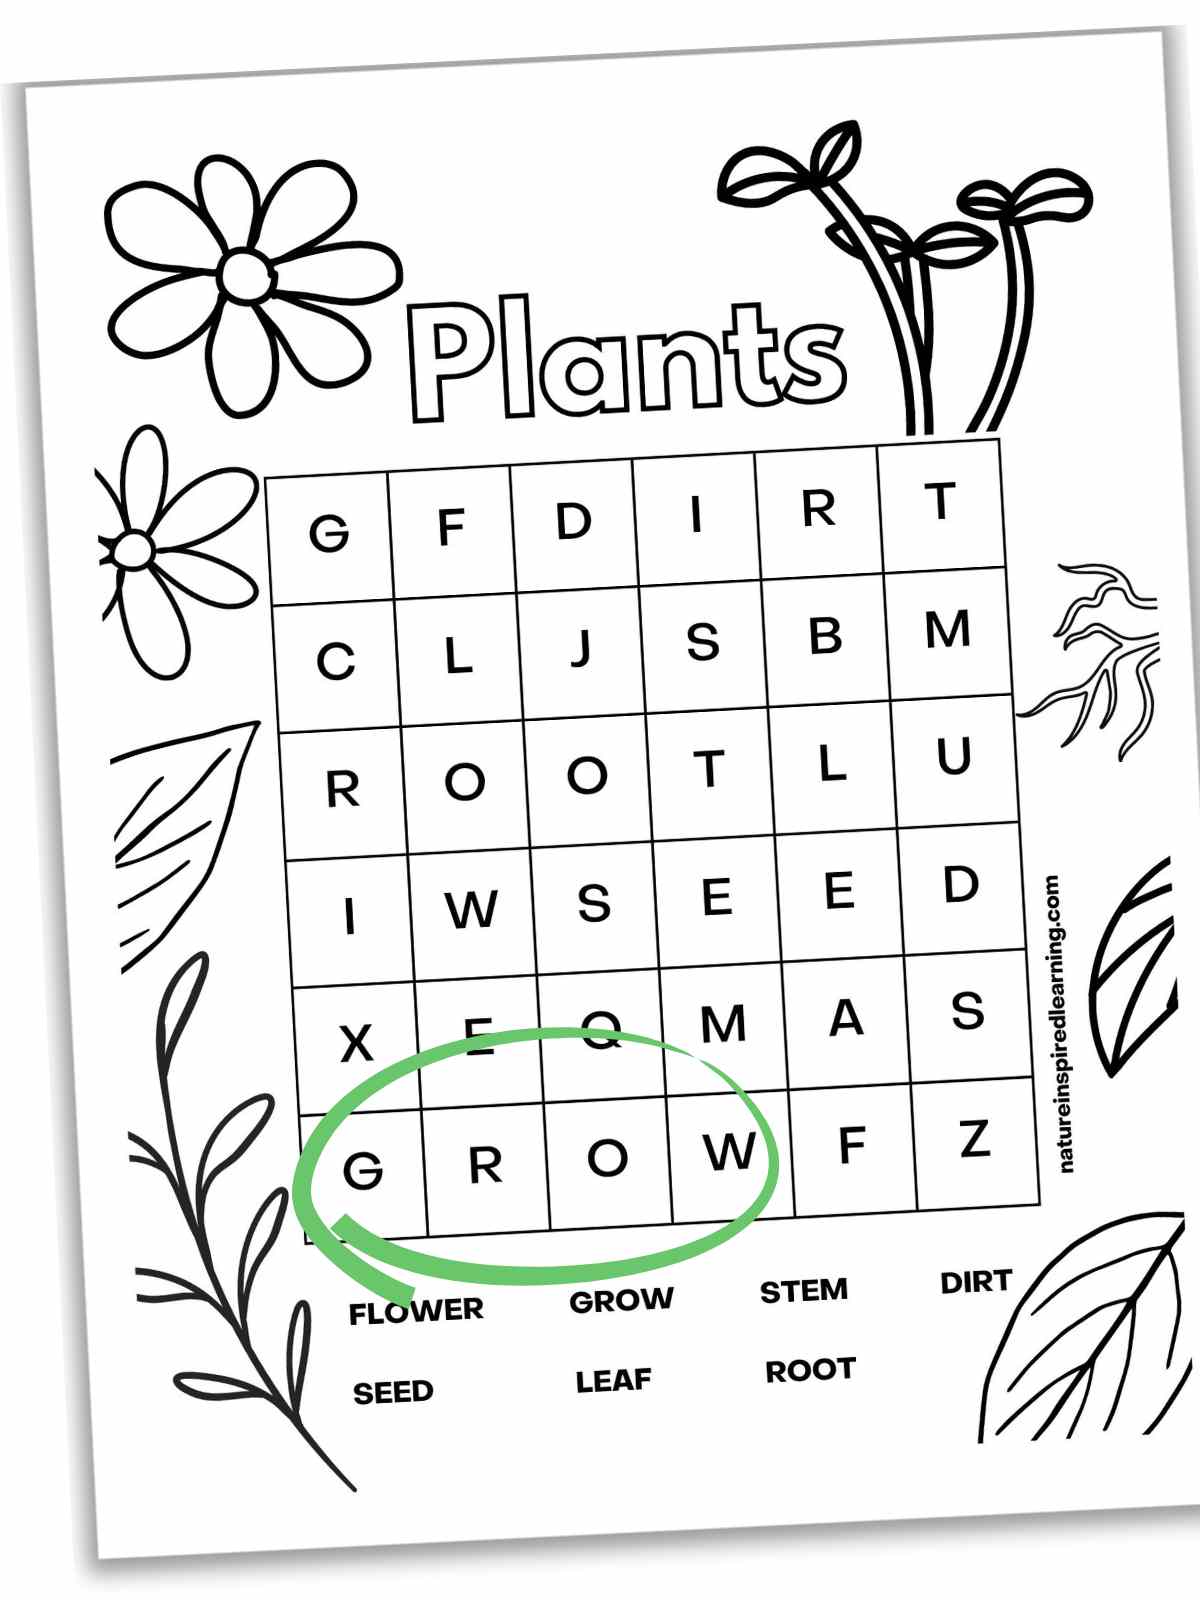 Simple word search with plant words and plant images around the border. Grow circled in green.